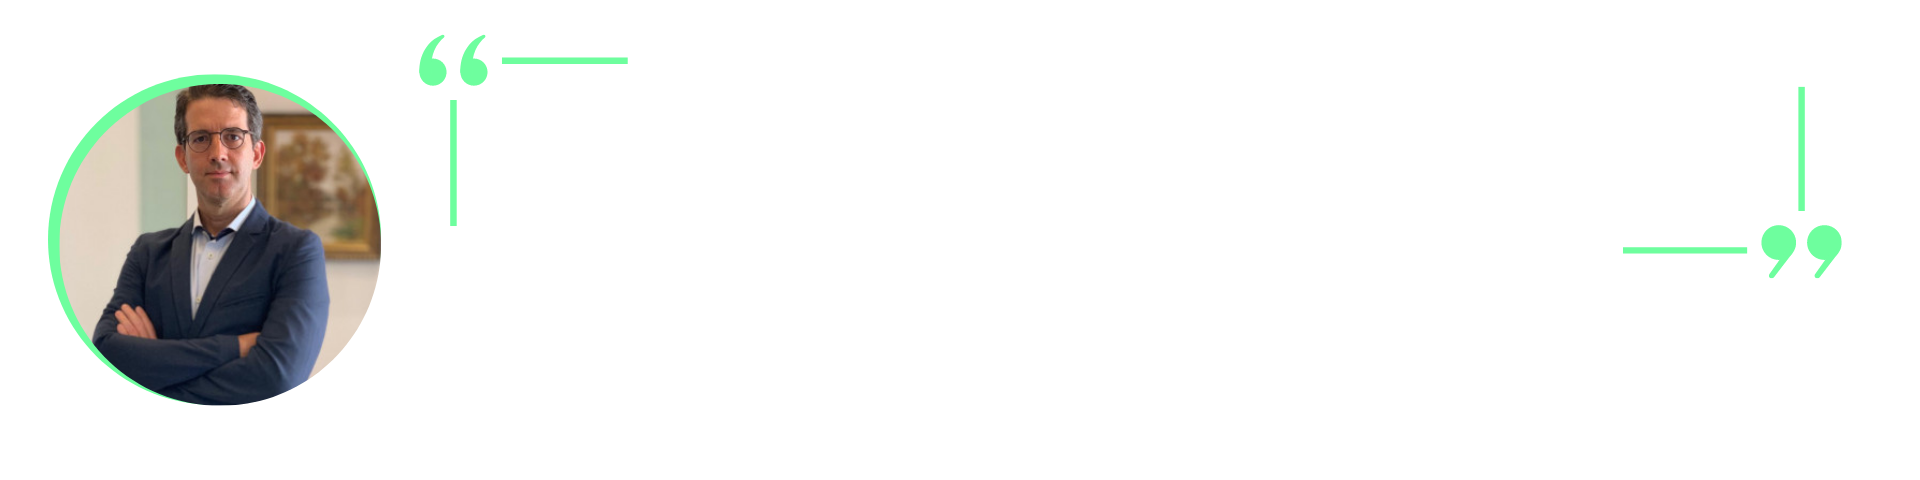 Doctor Montalverne's quotation : " " We have a period of recovery after the installation of the symptoms. So we should balance between the recovery and the risk of the treatment."